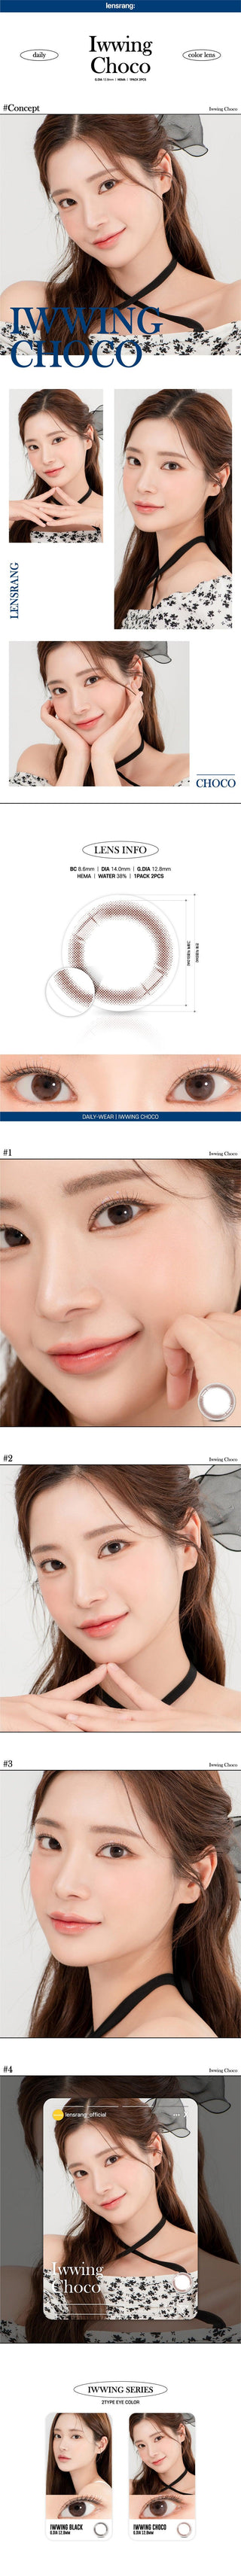 Model demonstrating a Kpop-inspired look with Lensrang Iwwing Choco coloured contact lenses, demonstrating the brightening and enlarging effect of the circle contact lenses on her dark eyes.